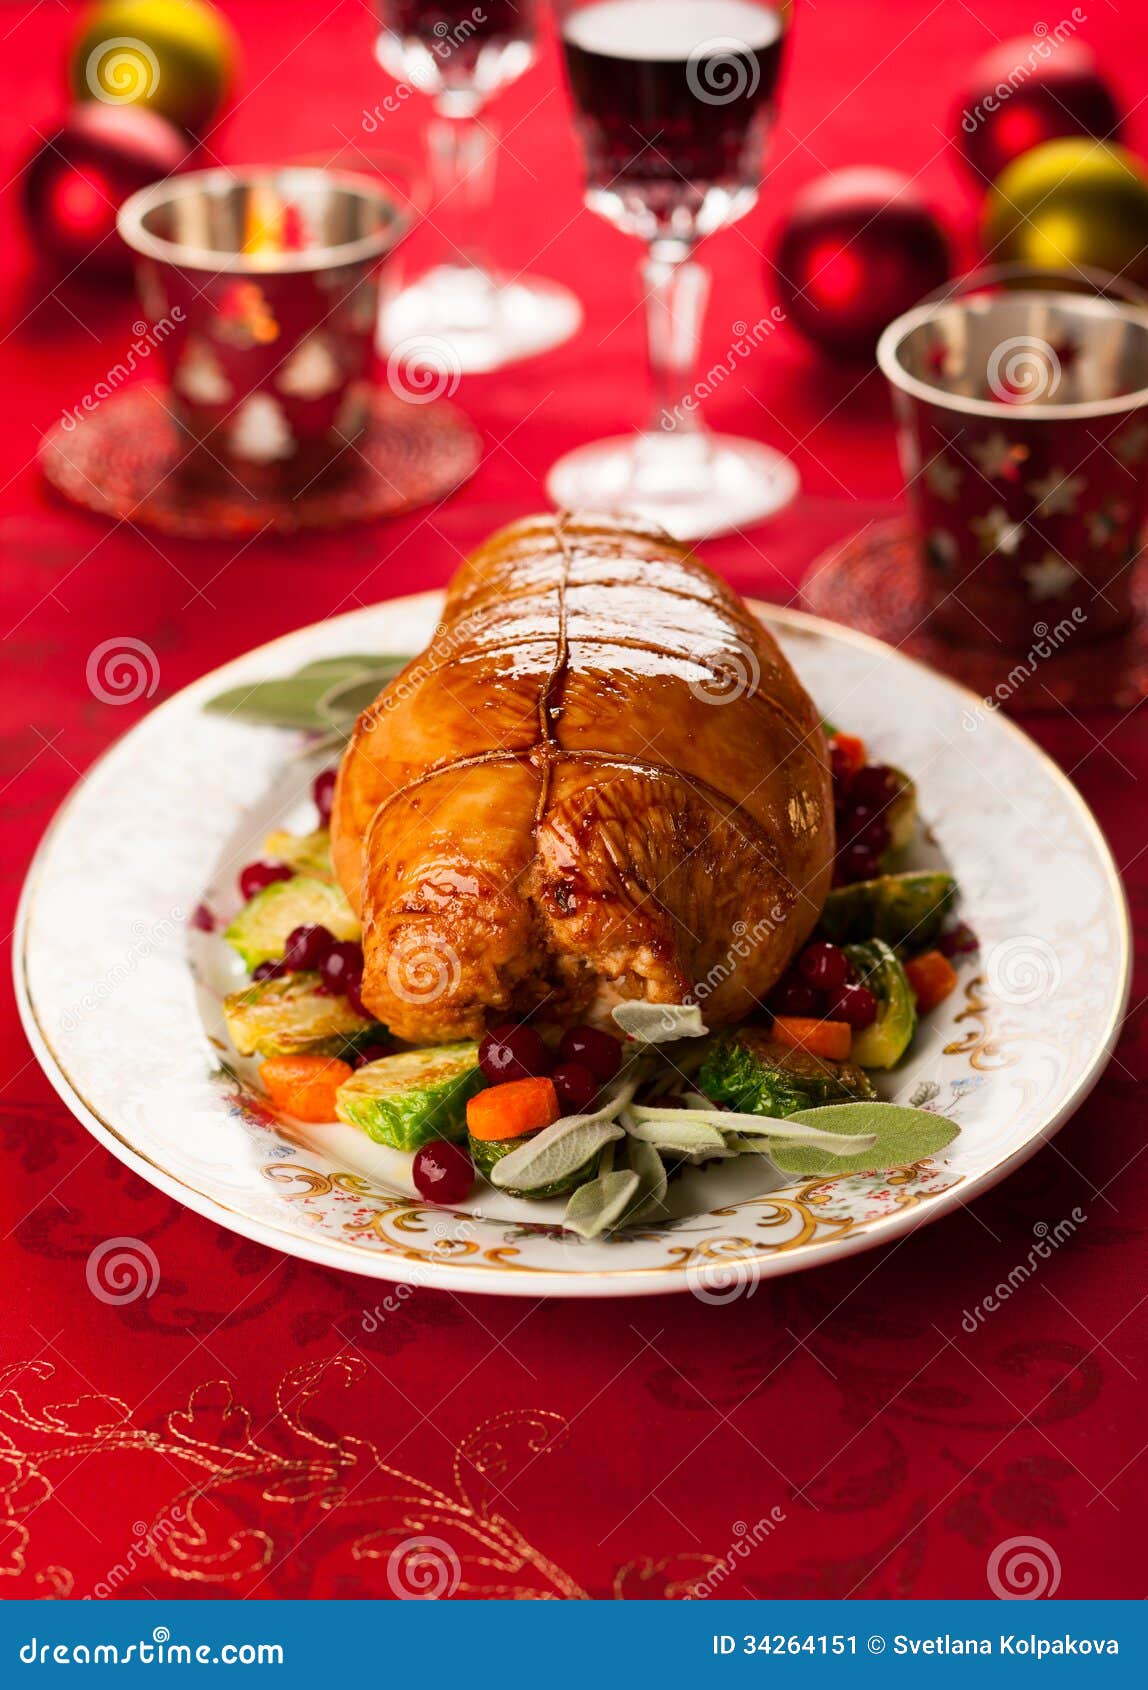 Stuffed turkey breast stock image. Image of healthy, delicious - 34264151